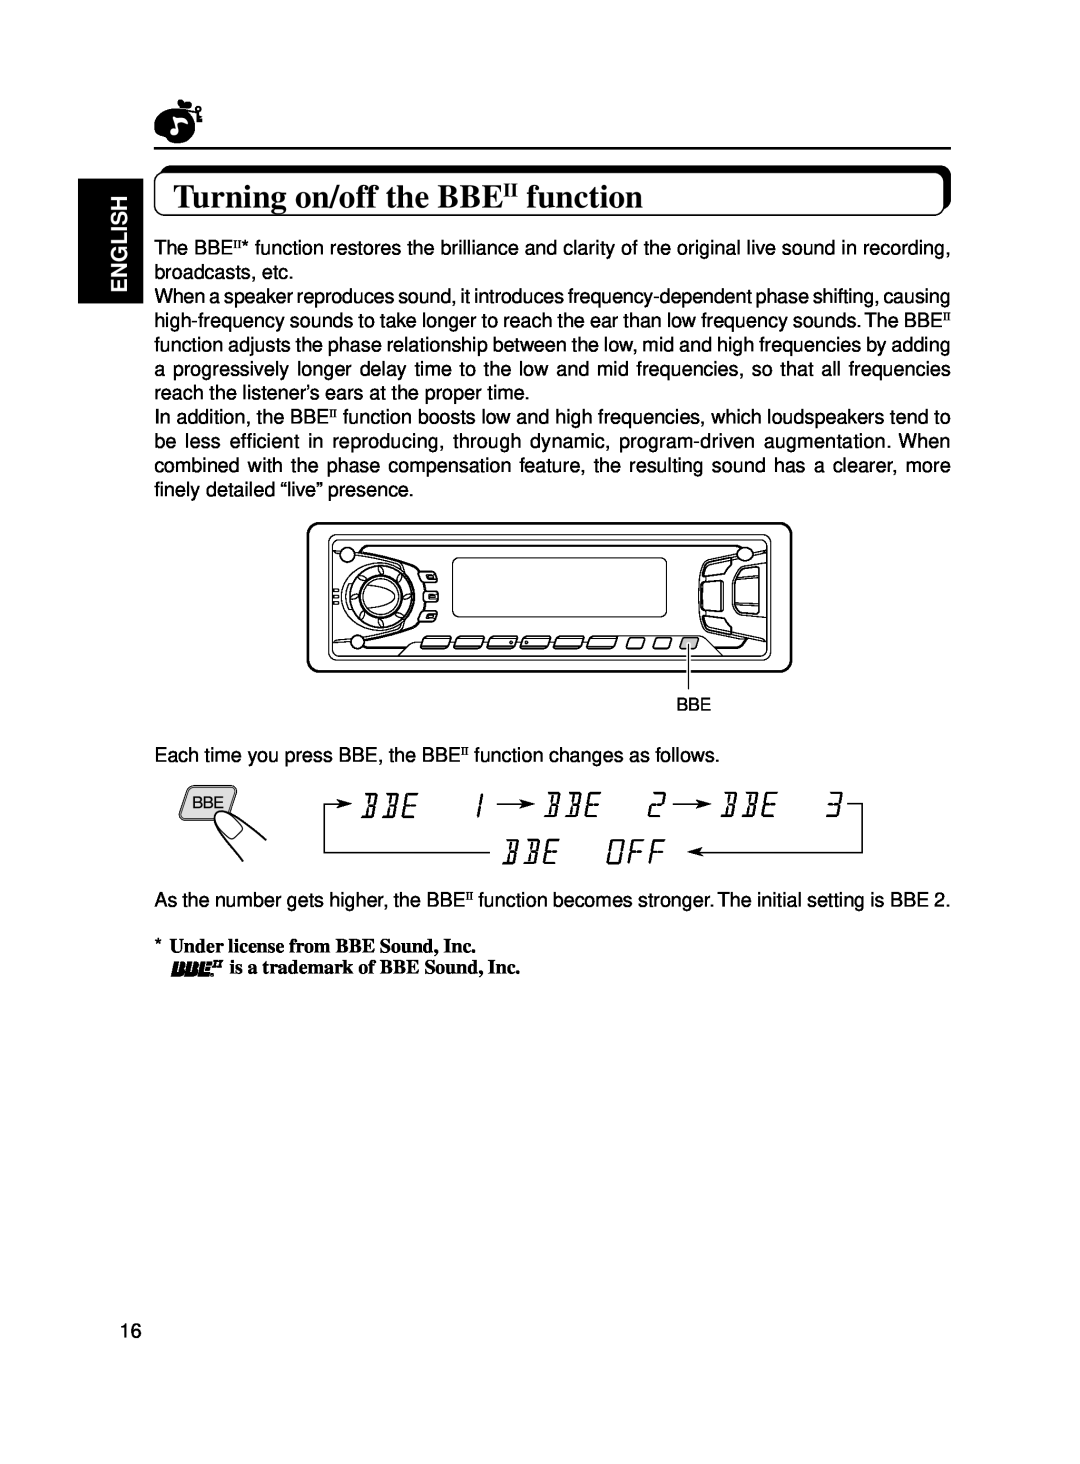 JVC KD-SX770, KD-SX870 manual Turning on/off the BBEII function, English, Under license from BBE Sound, Inc 